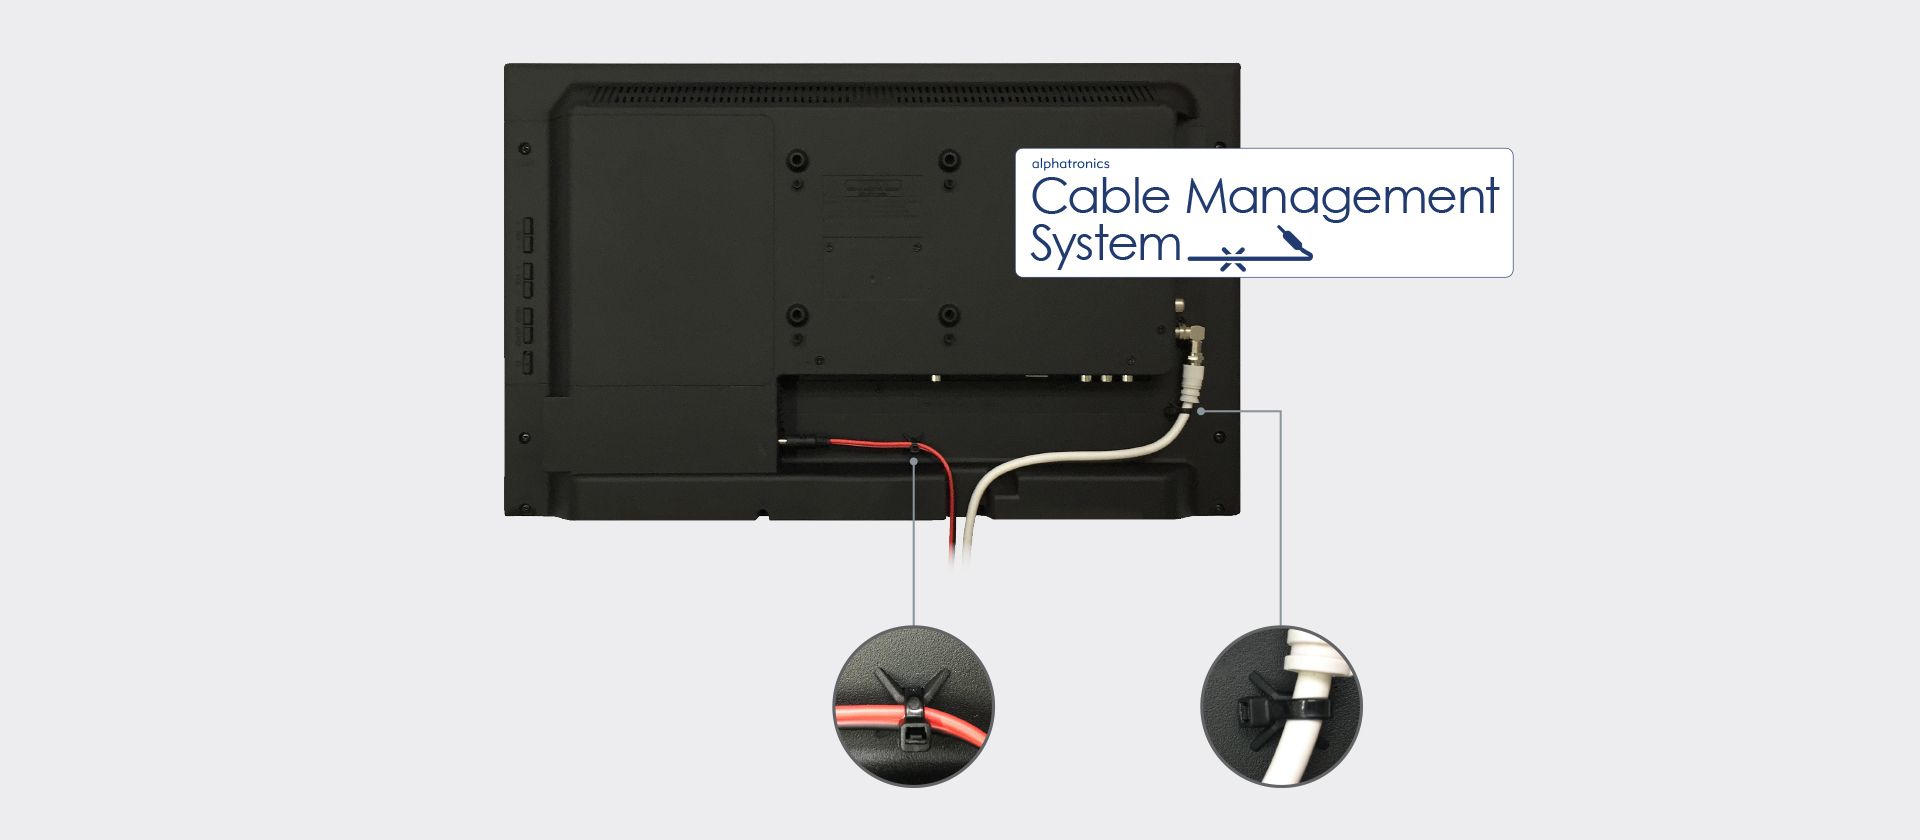 cable-management-system-20-1.jpg